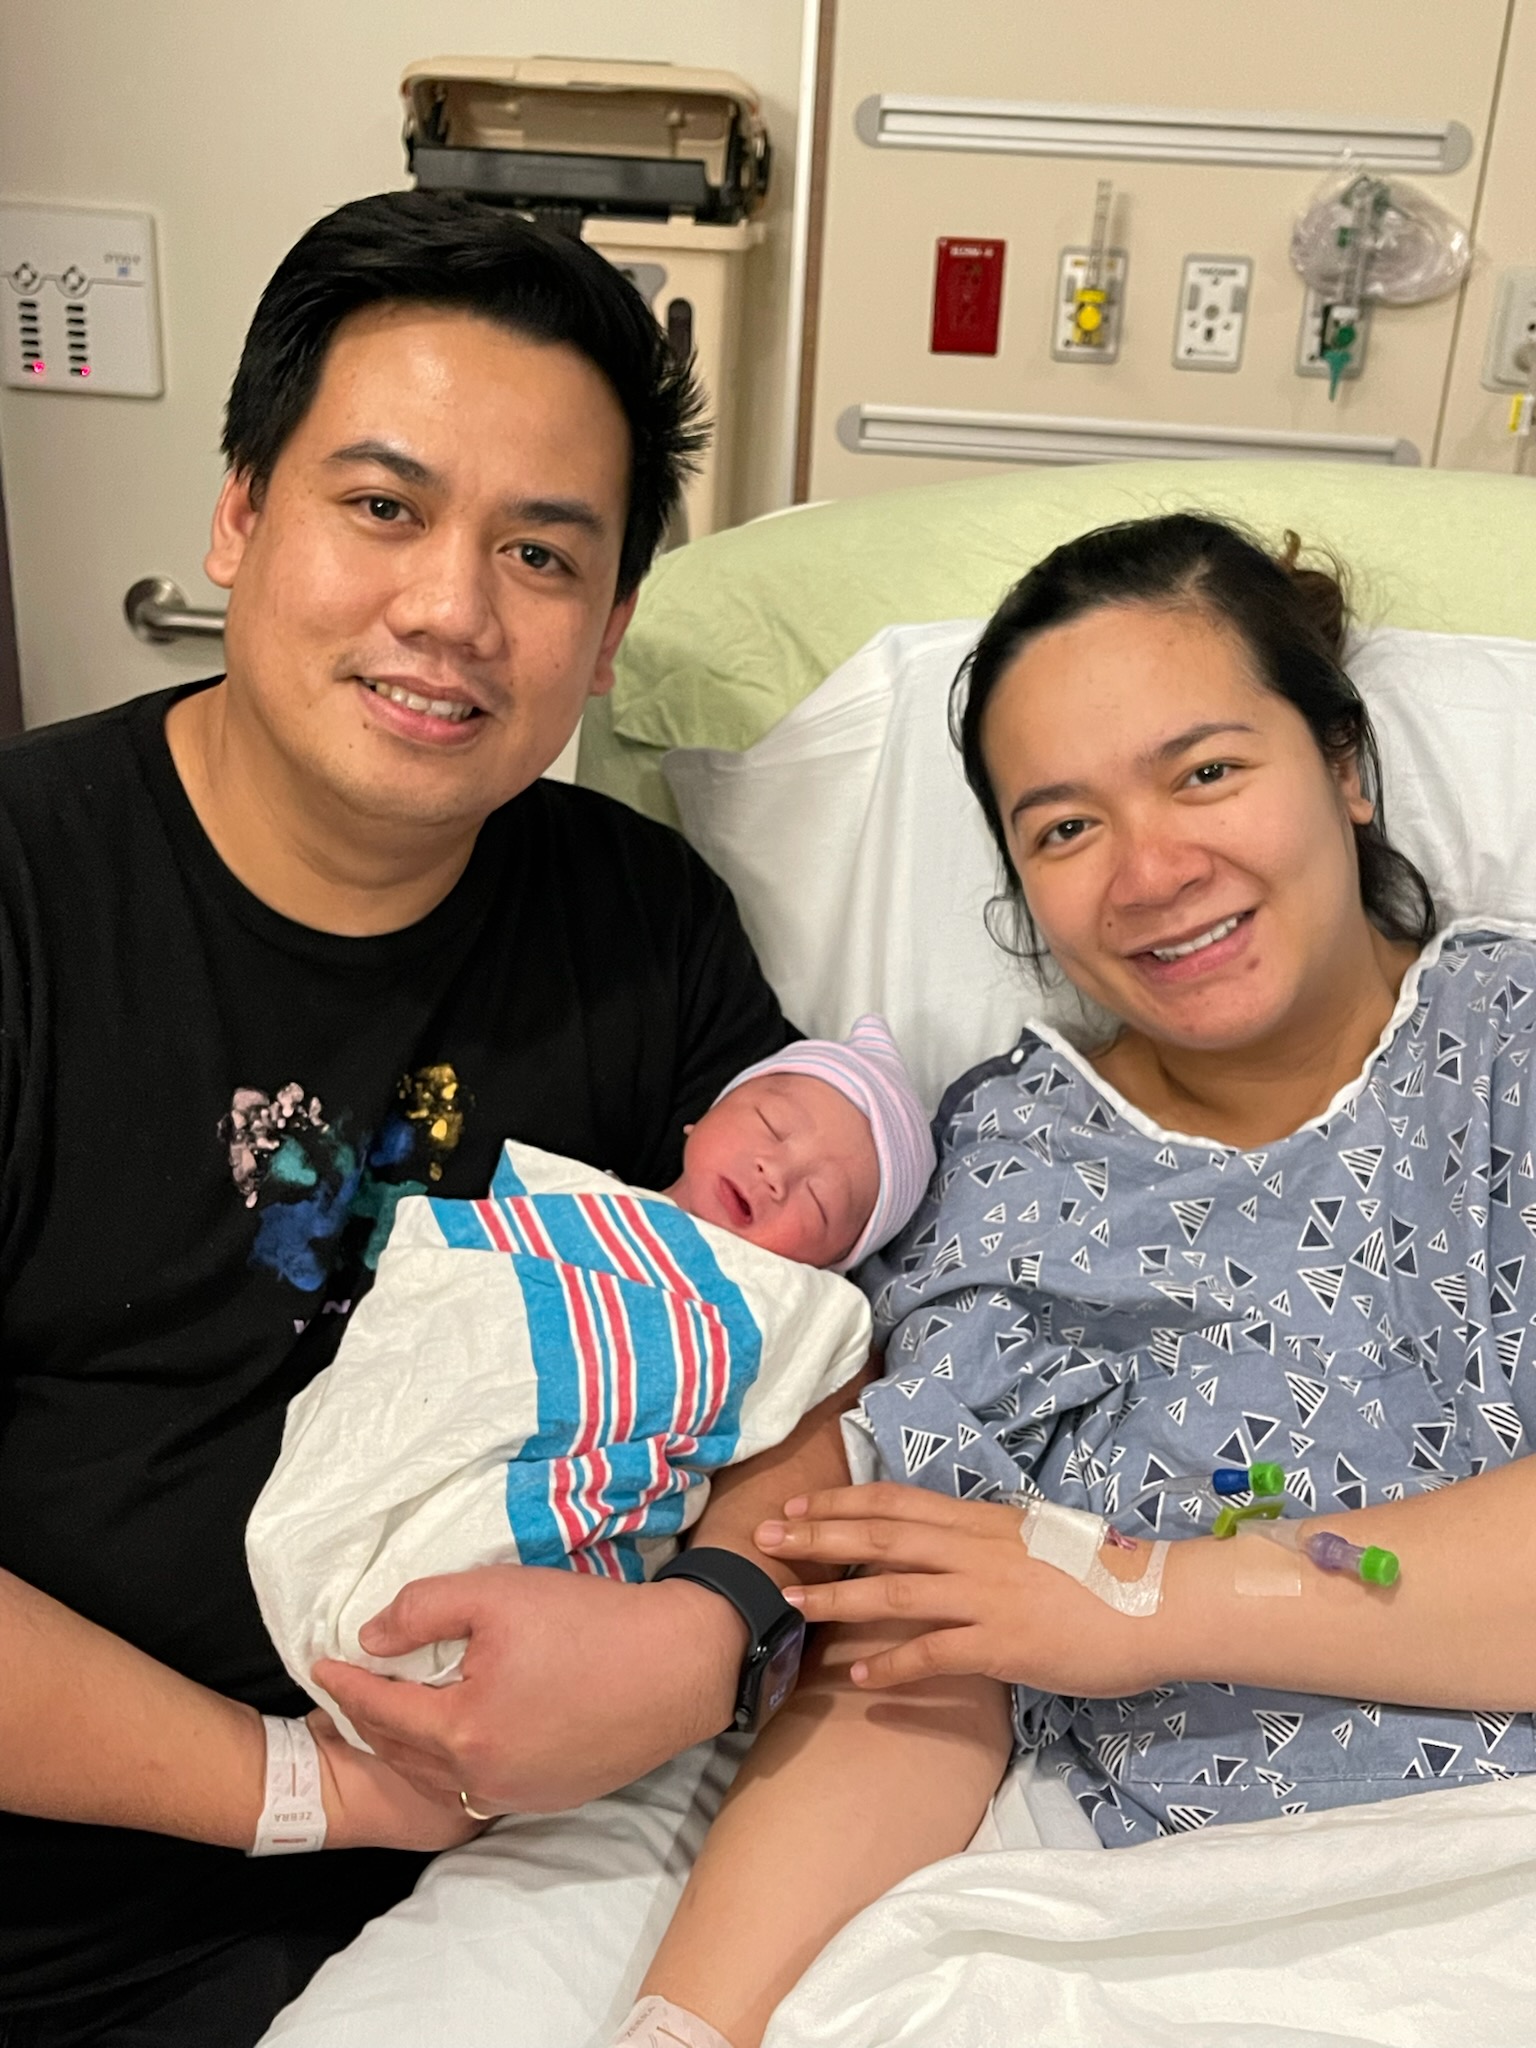 St. Joseph's Health Hospital shares its first baby of the New Year